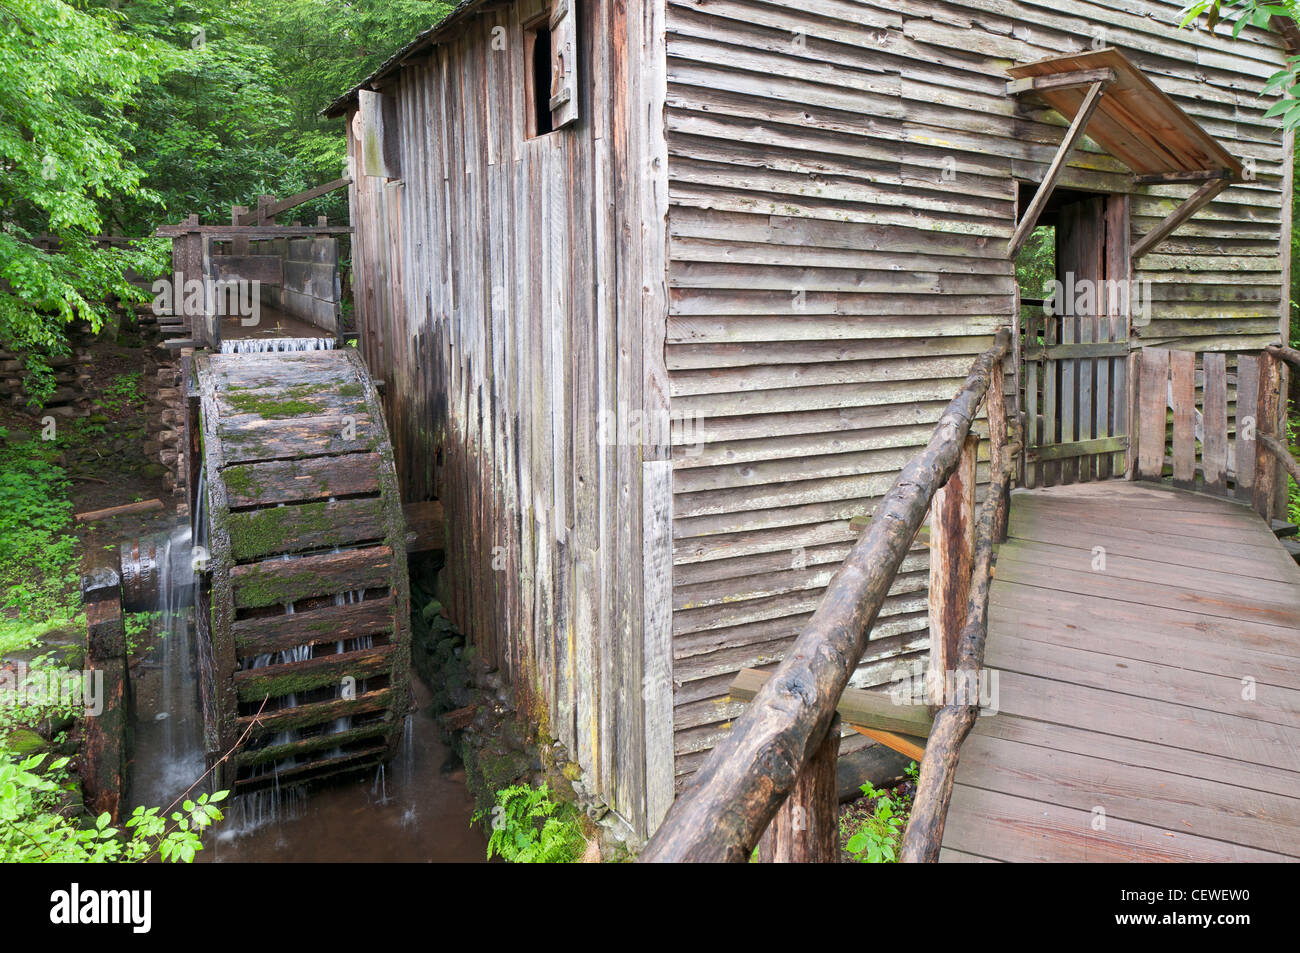 Tennessee, Great Smoky Mountains National Park, Cades Cove, John P. Cable Grist Mill, built 1870. Stock Photo